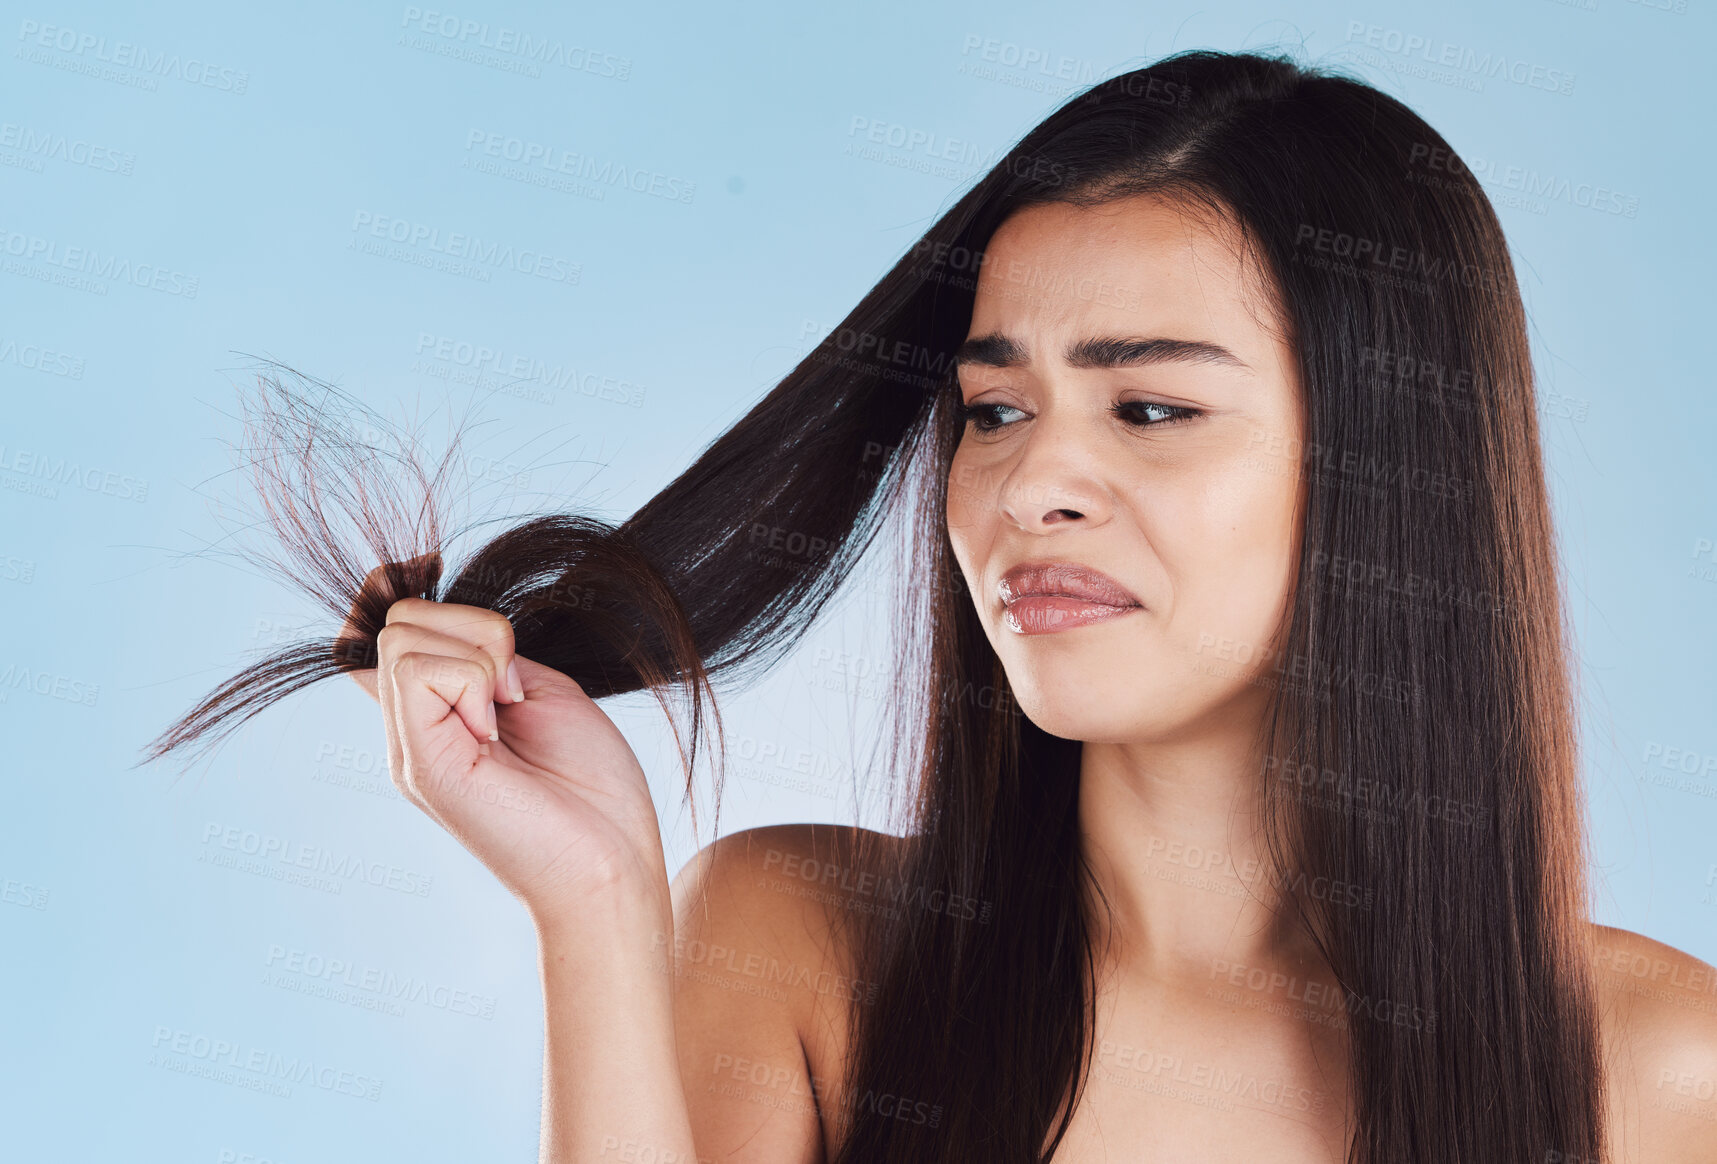 Buy stock photo One young hispanic woman looking unhappy and worried about her unhealthy hair while posing against a blue studio background. Mixed race model holding strands of her dry, frizzy and brittle hair with split ends